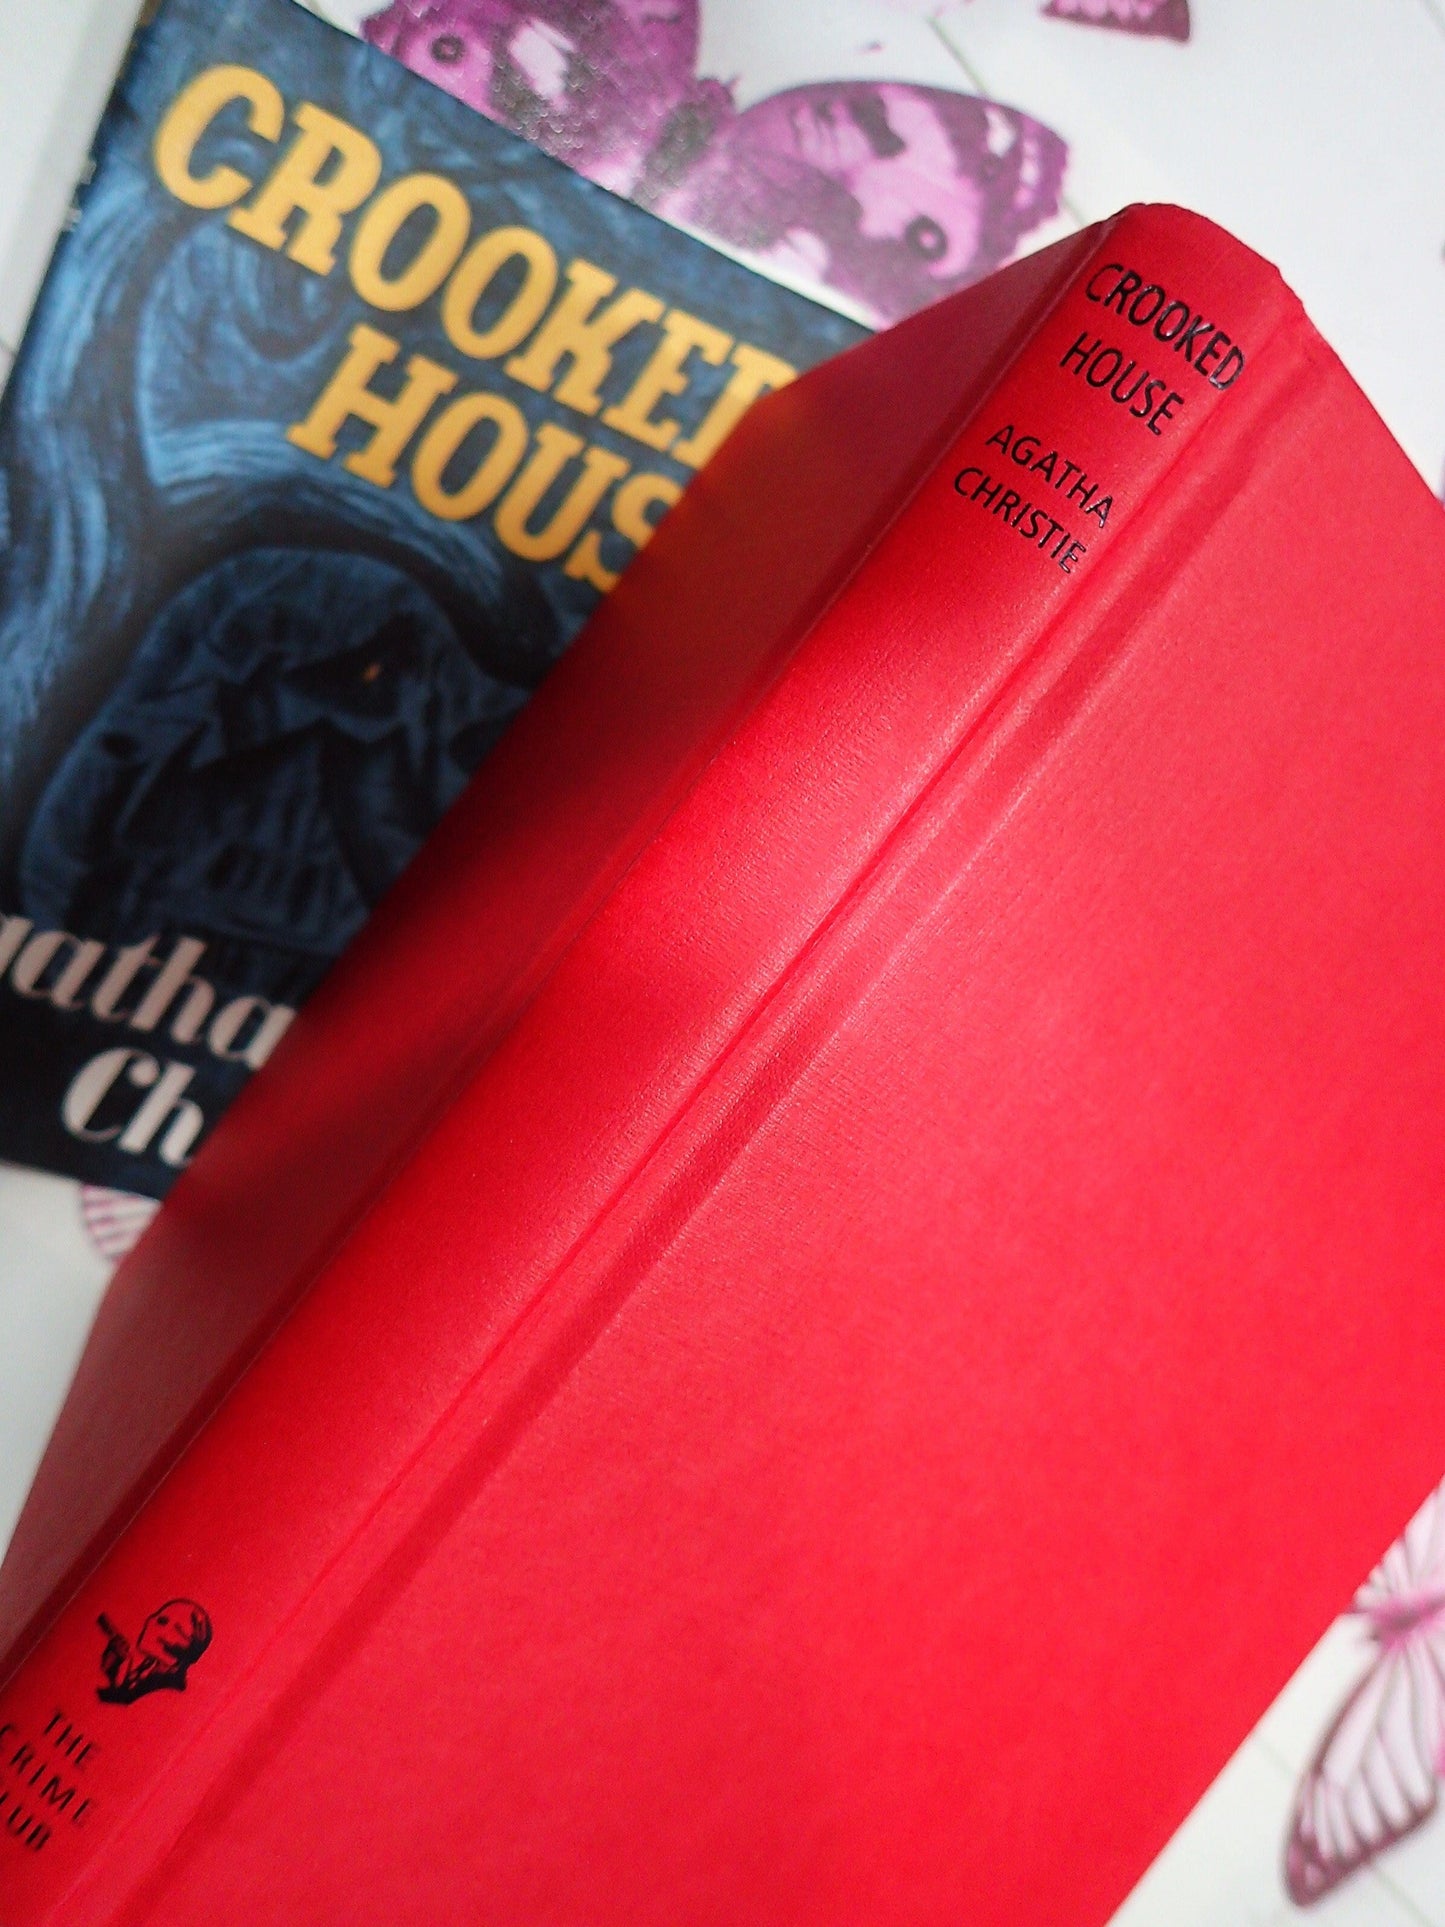 Red Binding and Black Titles on book The Crooked House by Agatha Christie